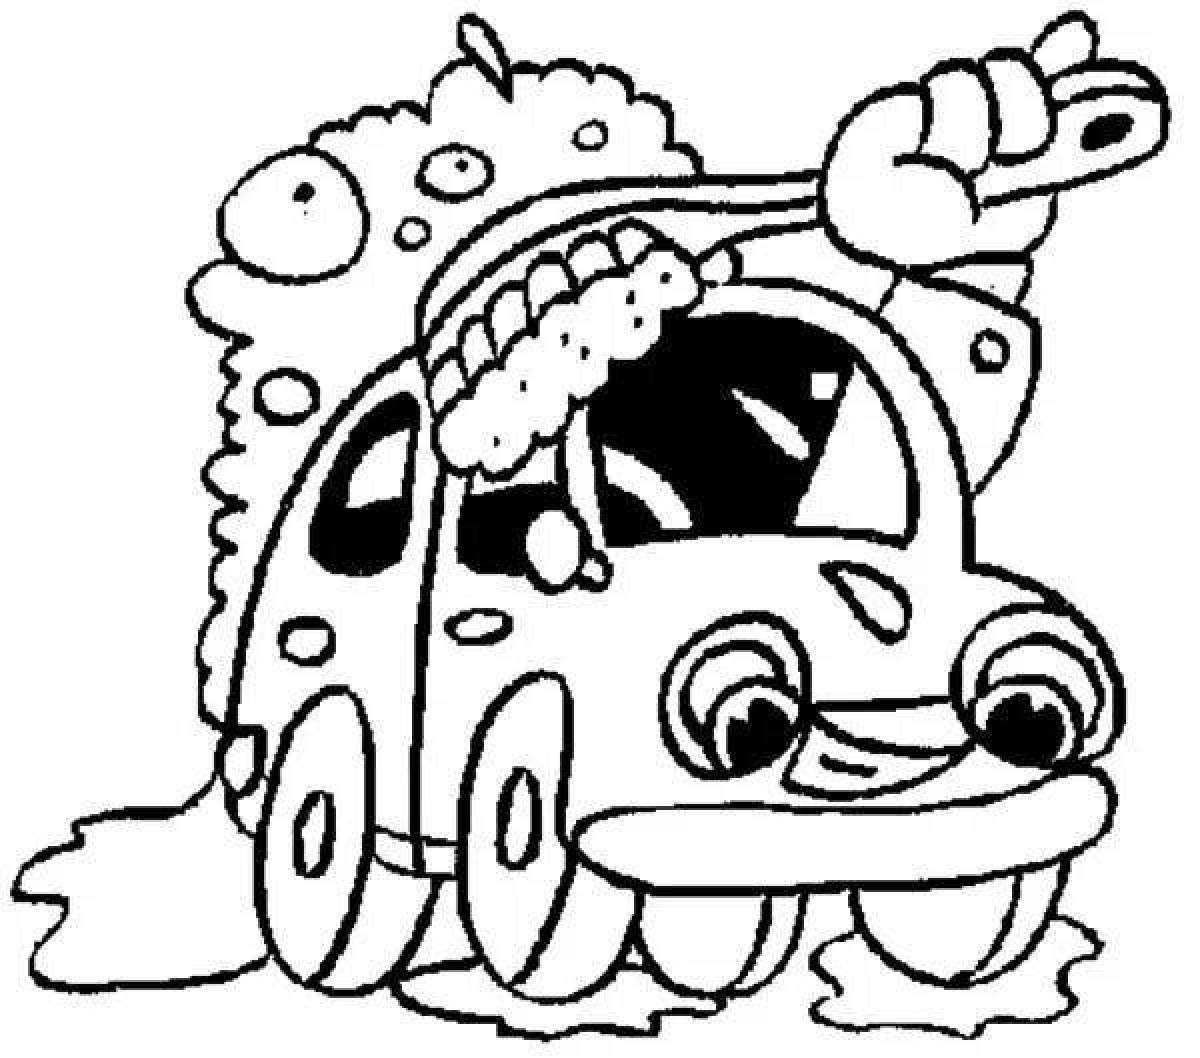 Playful car wash coloring page